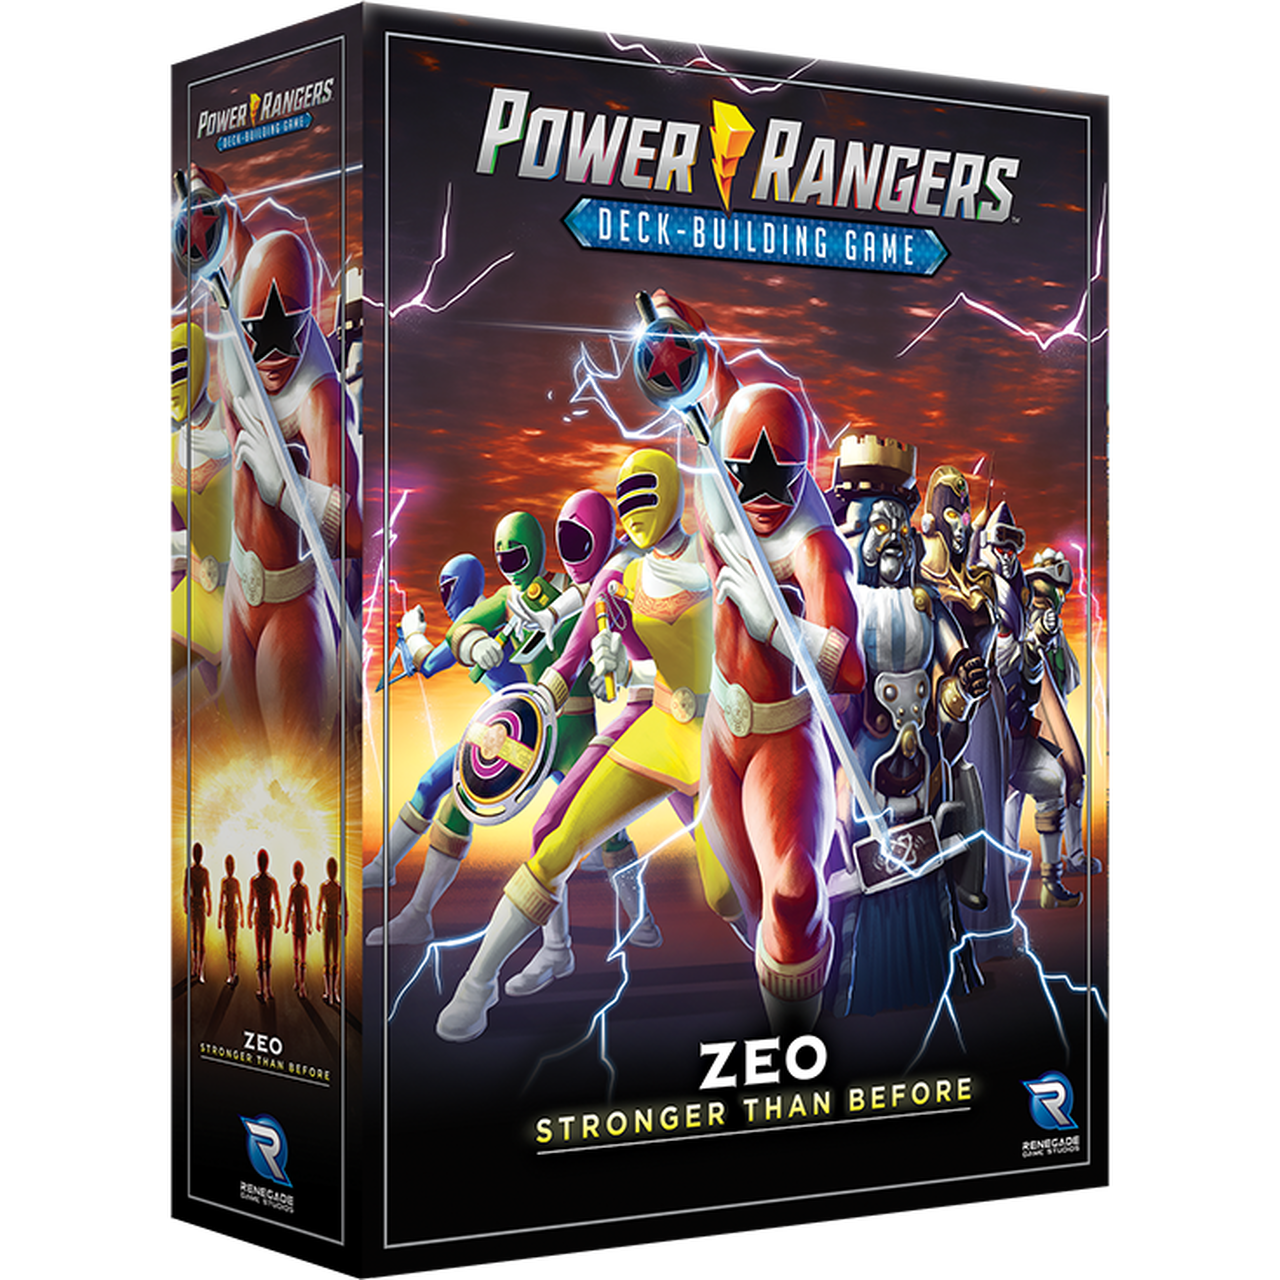 Power Rangers: Deck Building Game - Zeo: Stronger Than Before